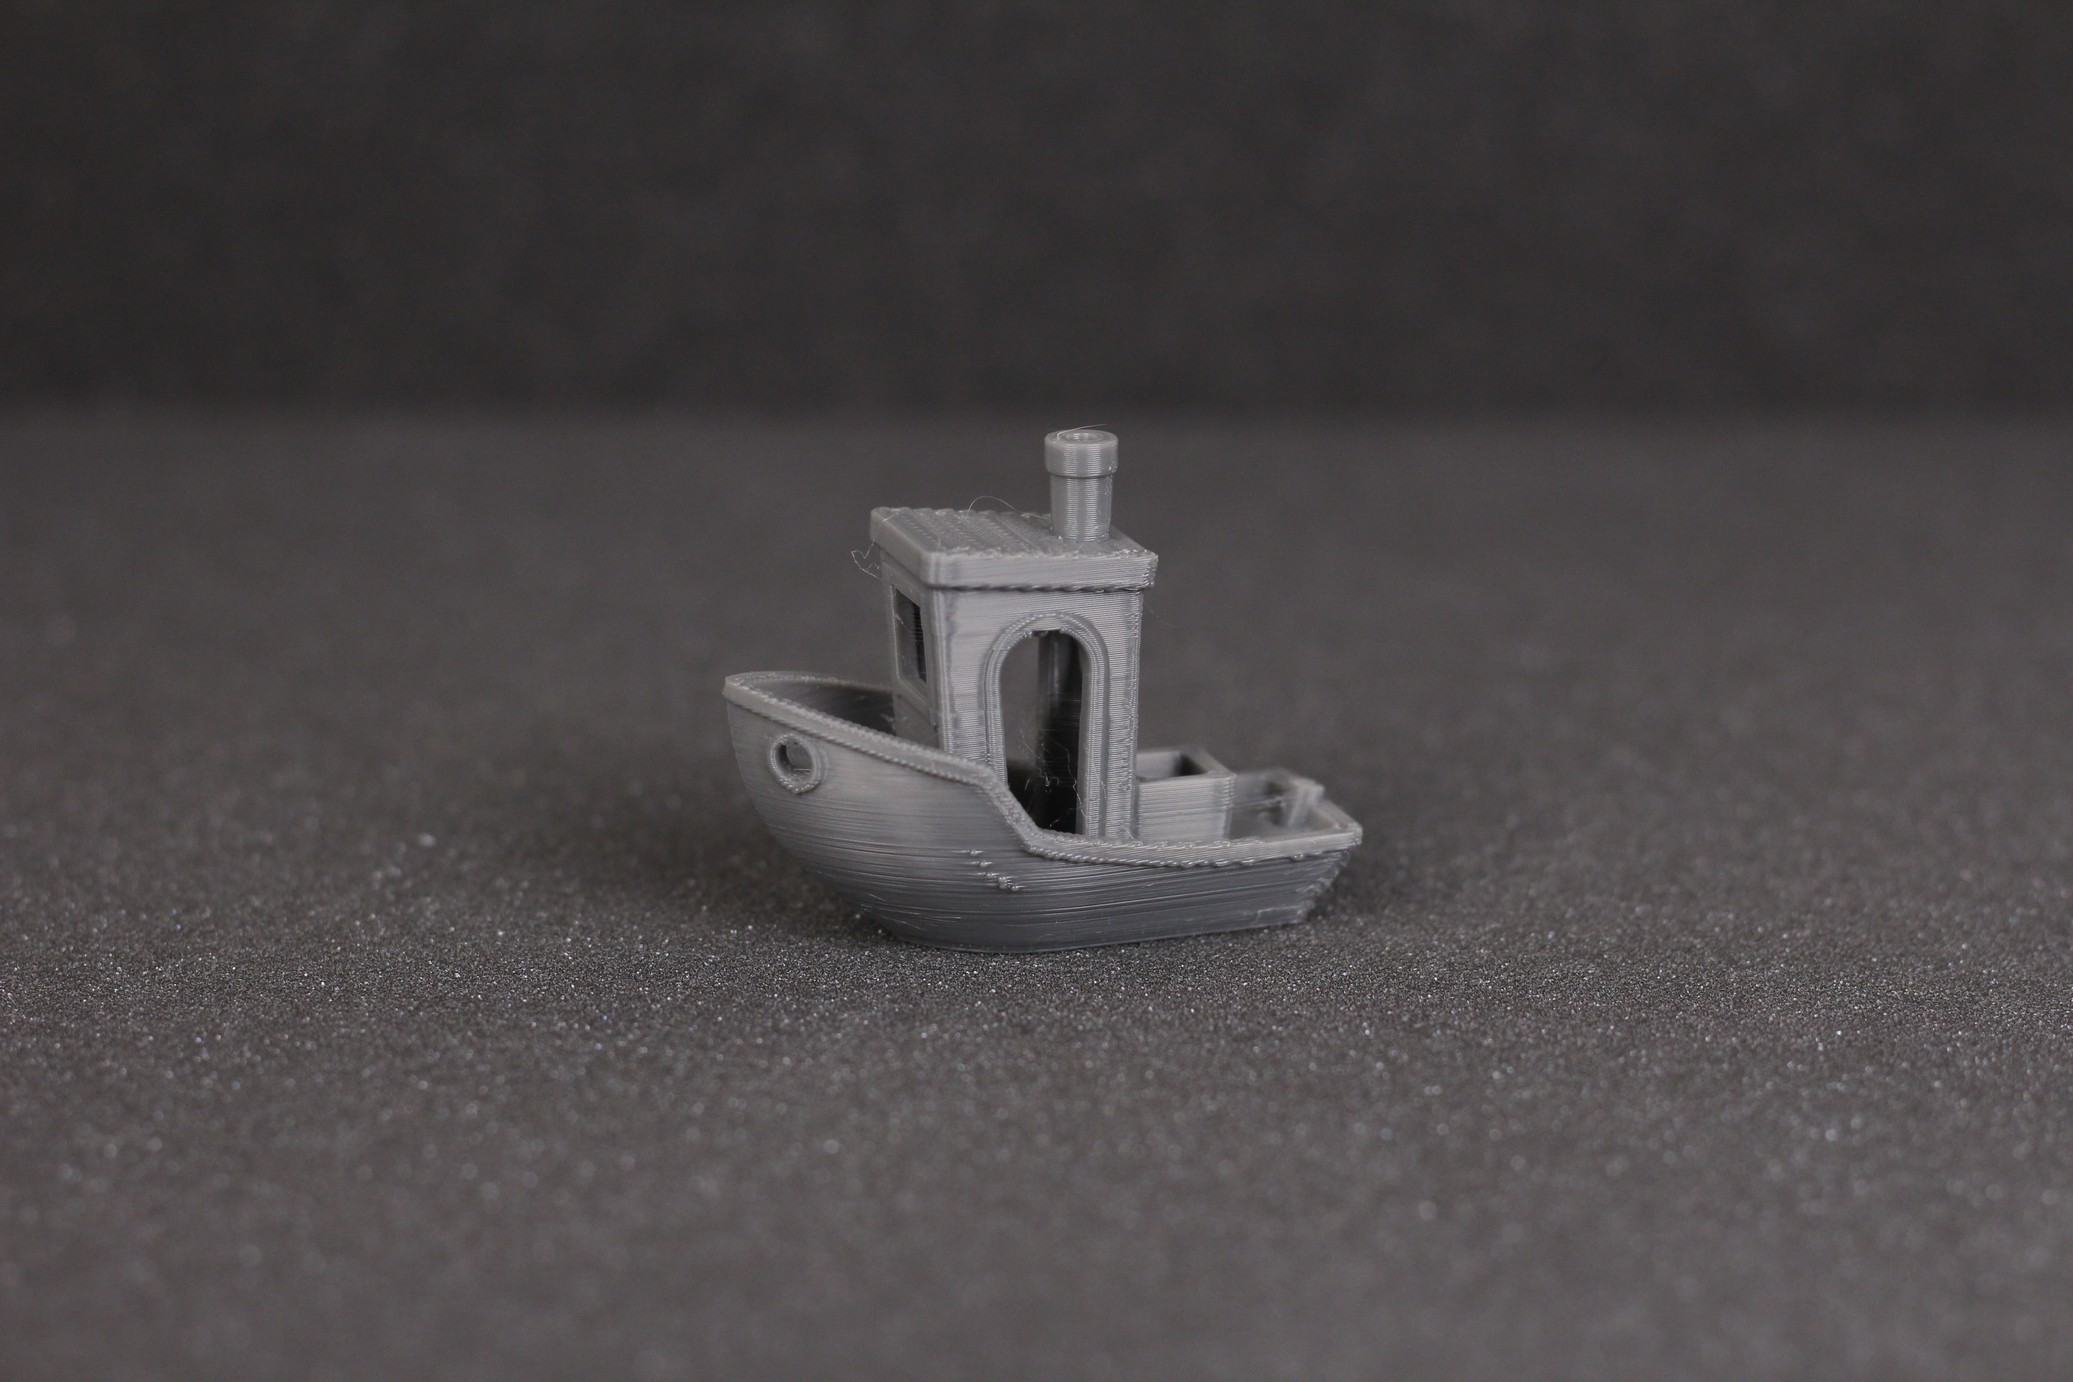 3D Benchy printed on the Ender 3 S1 3 | Creality Ender 3 S1 Review: Almost Perfect